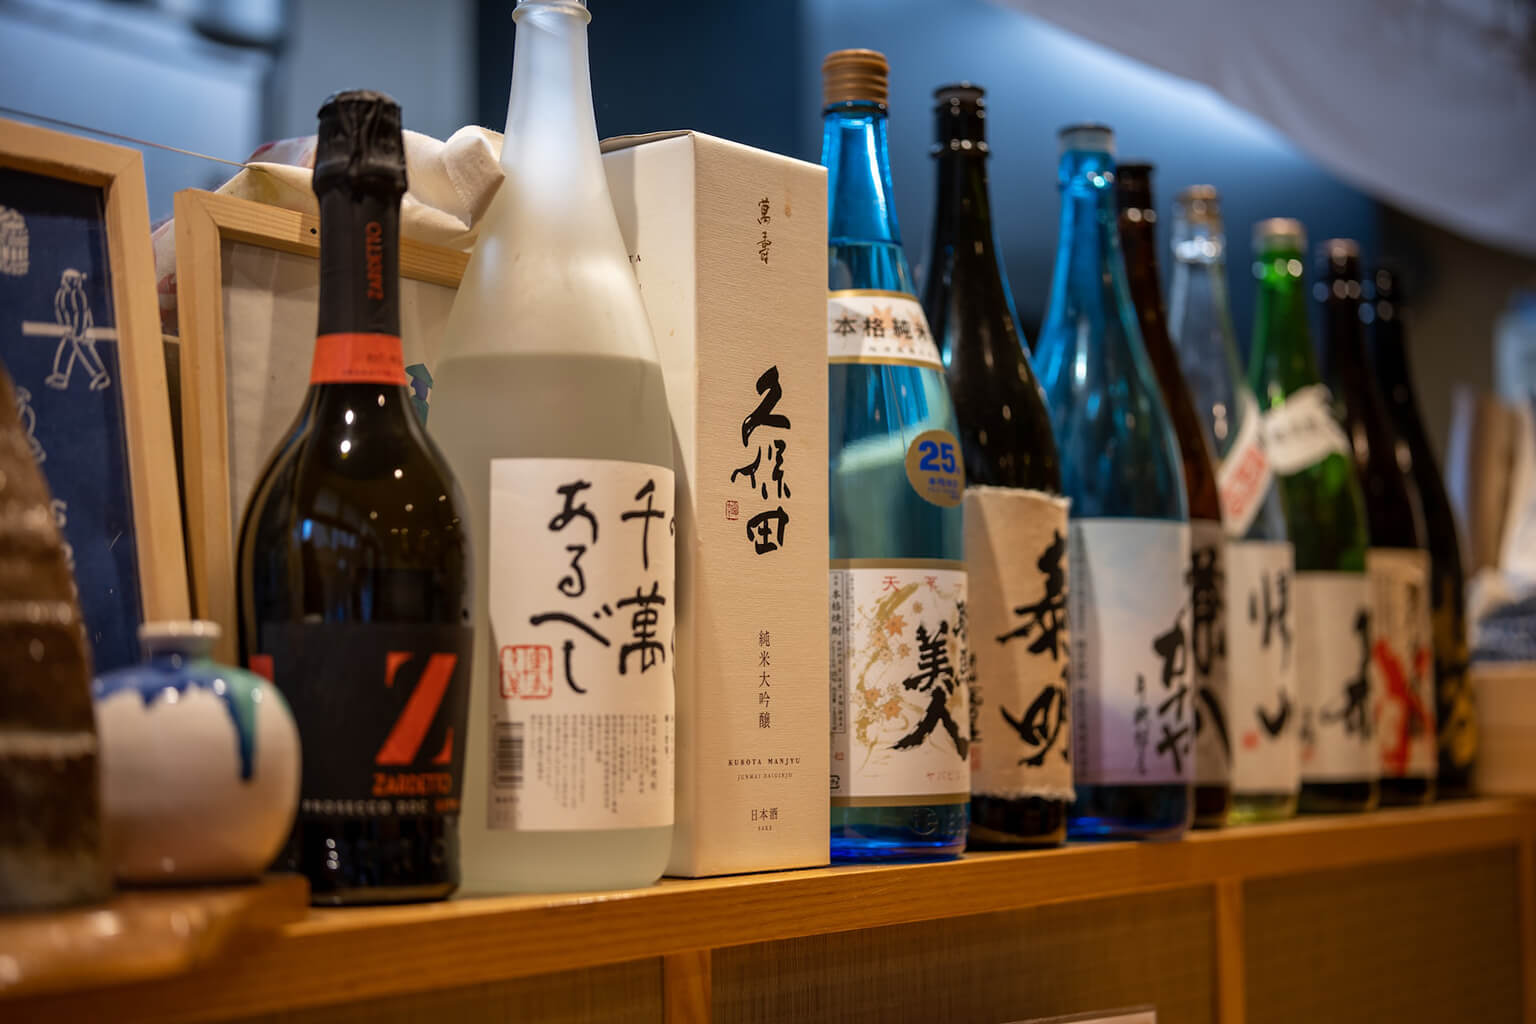 Sake bottles come in various sizes and colors